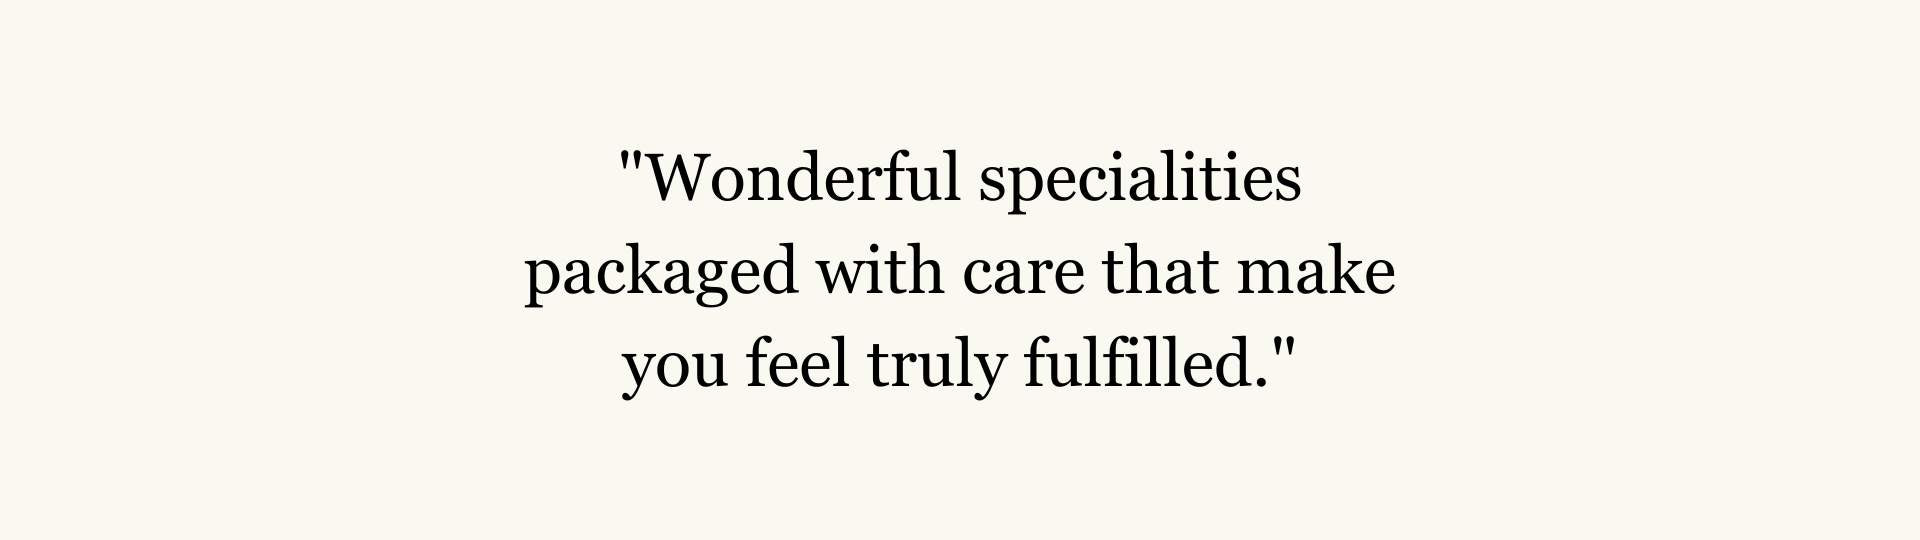 Slide that reads "Wonderful specialities packaged with care that make you feel truly fulfilled."